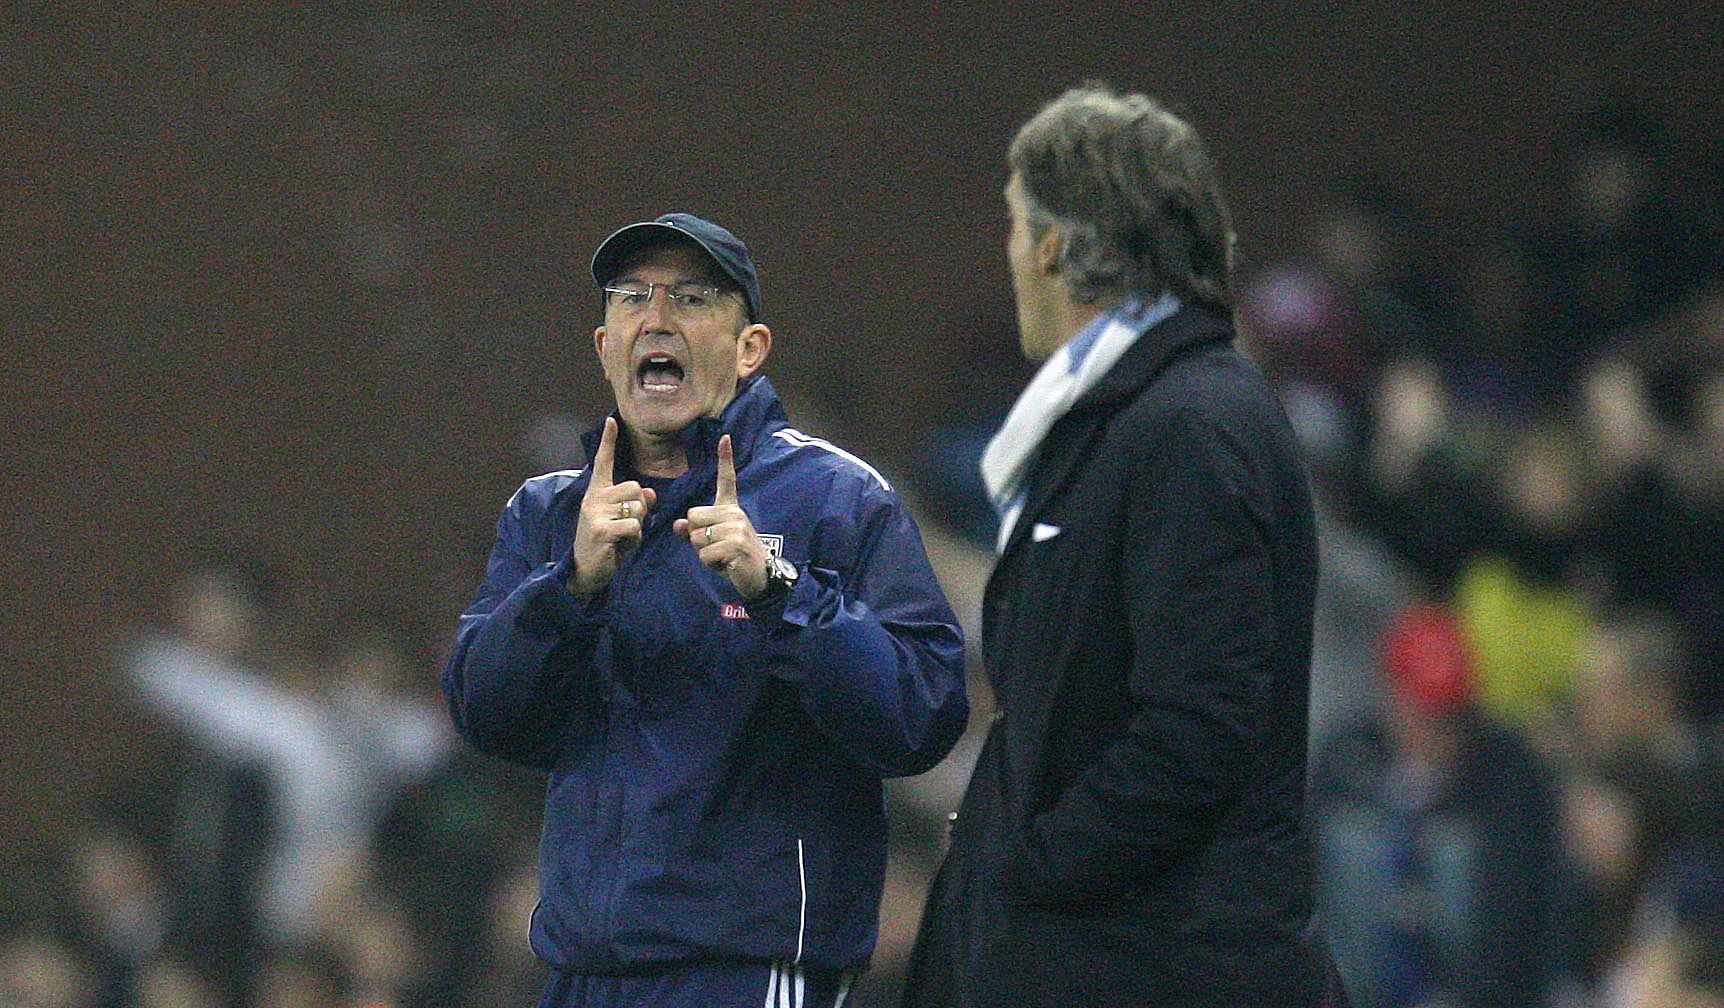 Football - Stoke City v Manchester City Barclays Premier League  - The Britannia Stadium - 24/3/12 
Manchester City manager Roberto Mancini and Stoke manager Tony Pulis (L) clash on the touchline 
Mandatory Credit: Action Images / Carl Recine 
Livepic 
EDITORIAL USE ONLY. No use with unauthorized audio, video, data, fixture lists, club/league logos or live services. Online in-match use limited to 45 images, no video emulation. No use in betting, games or single club/league/player publications.  